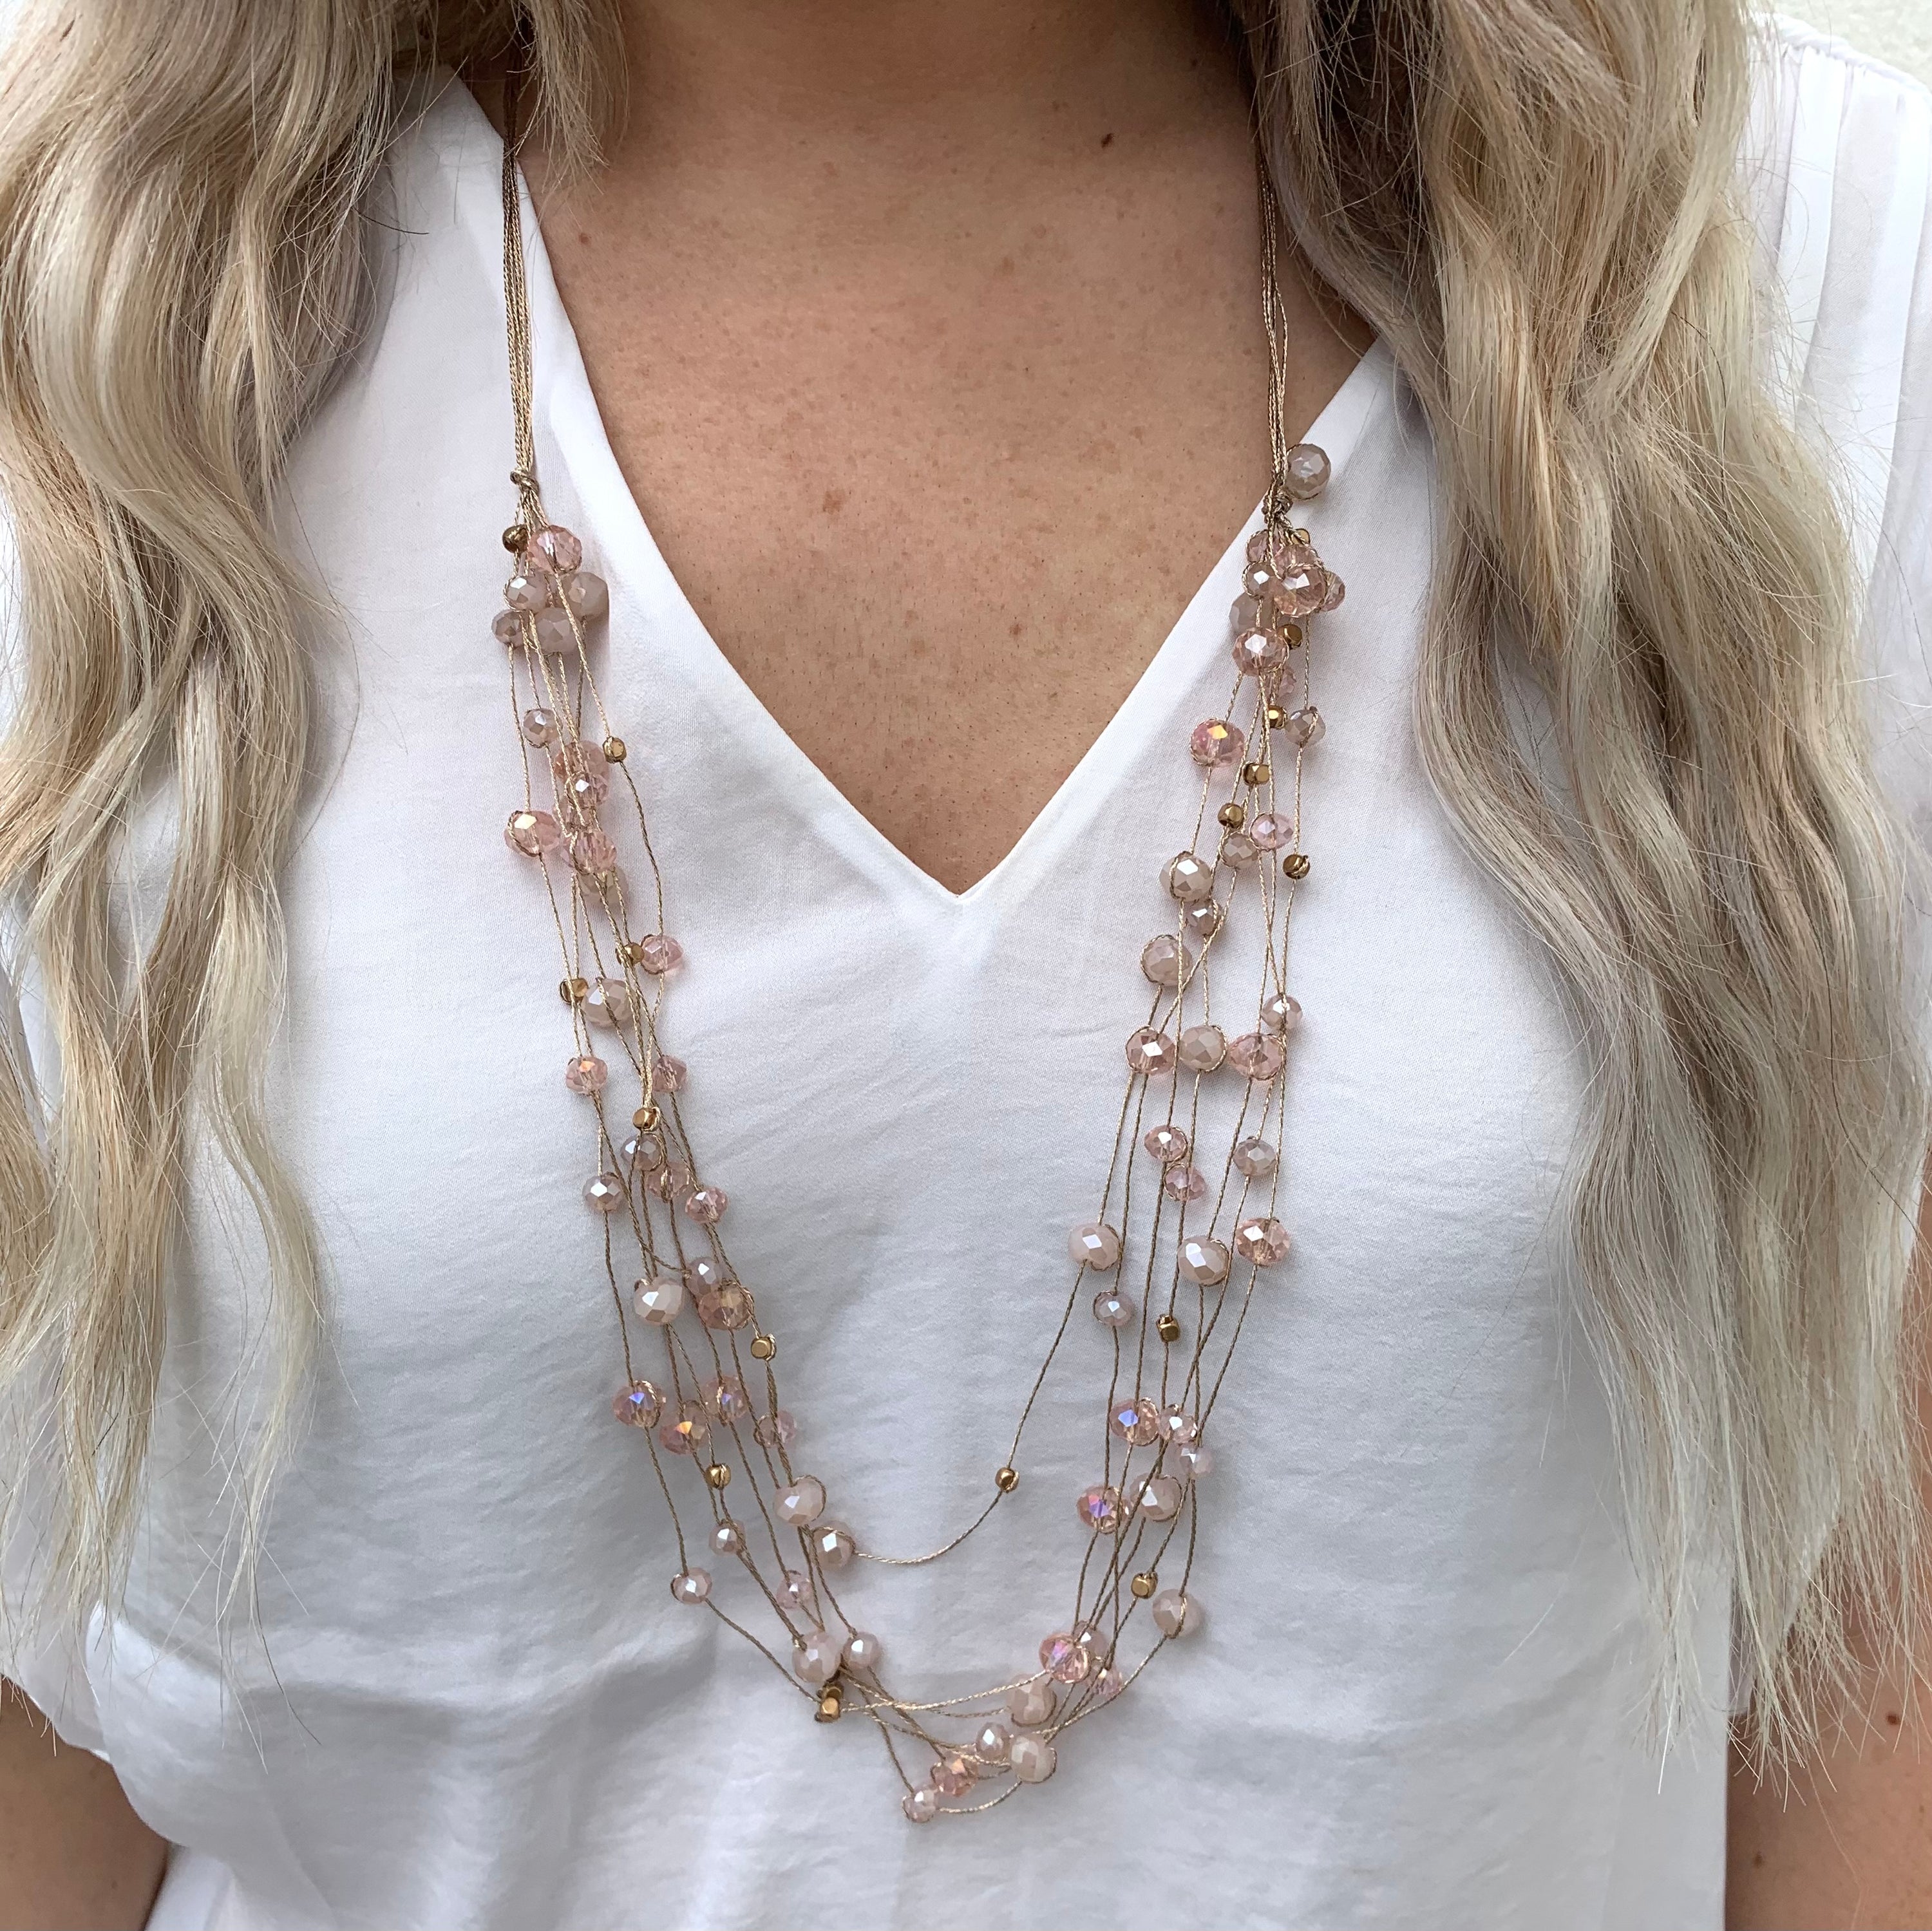 Stella beaded necklace in blush. Multiple strands of scattered beads on model. 